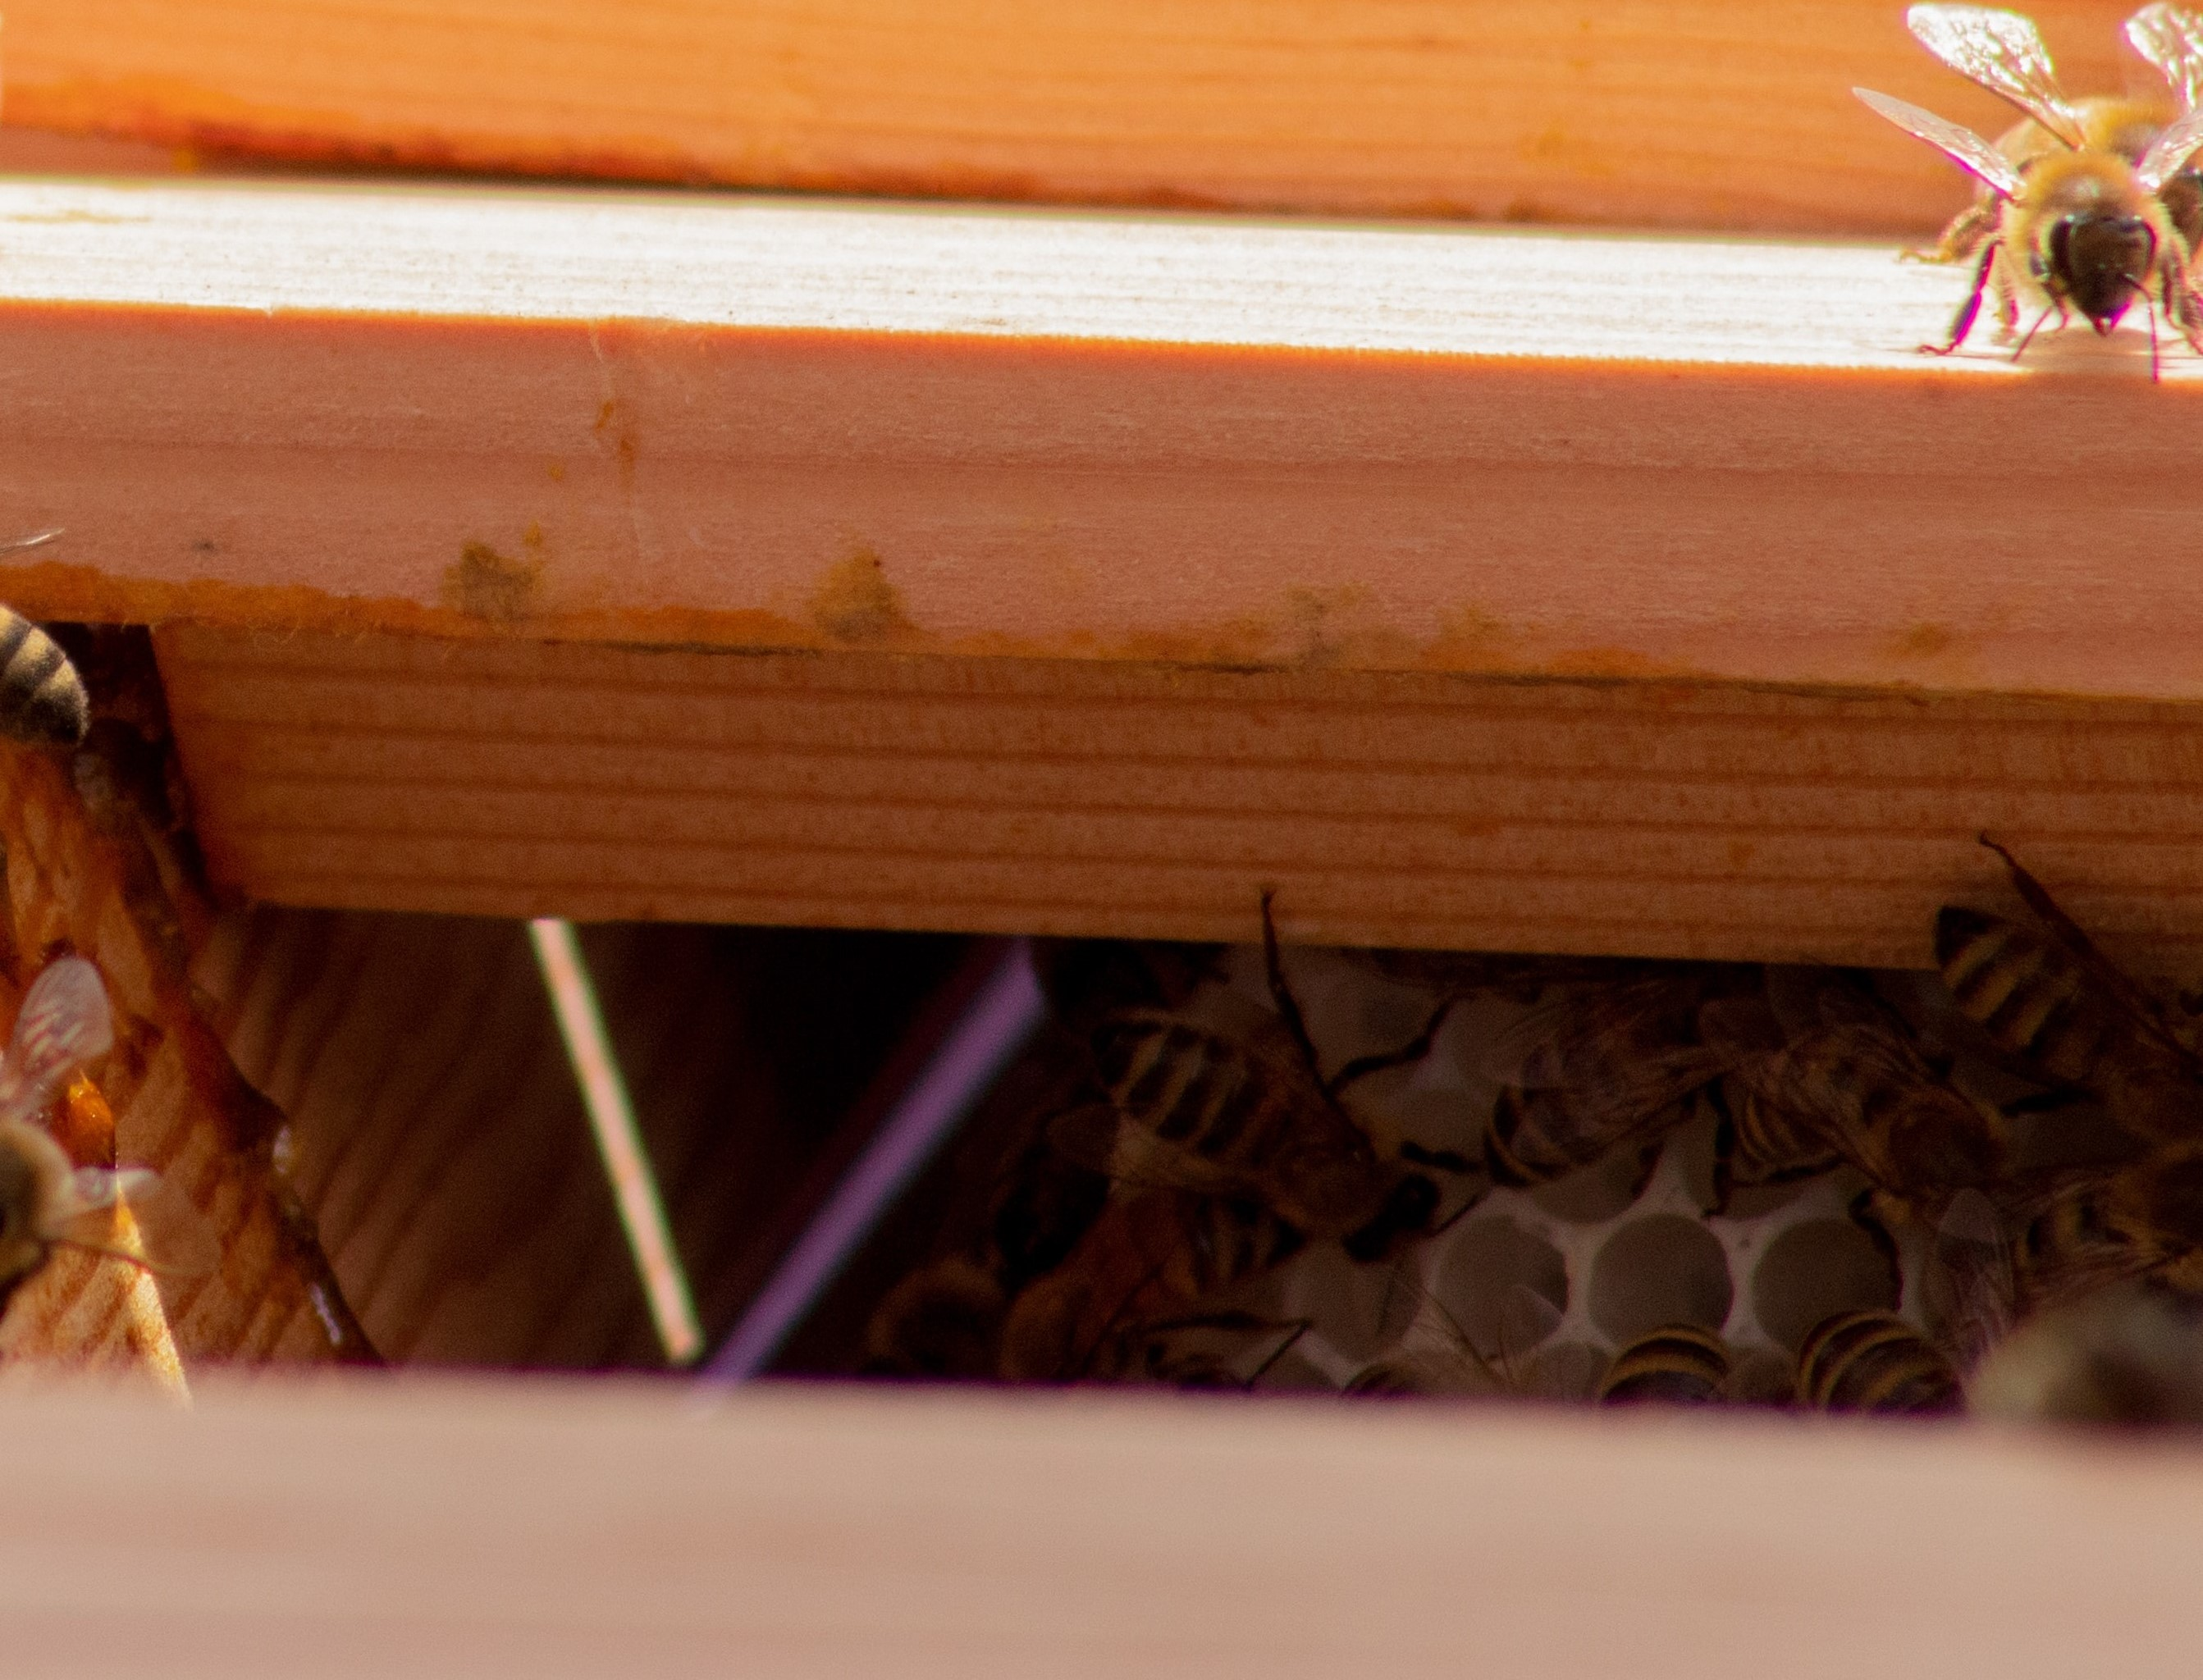 Forming a festooning position allows for more heat regulation inside the hives